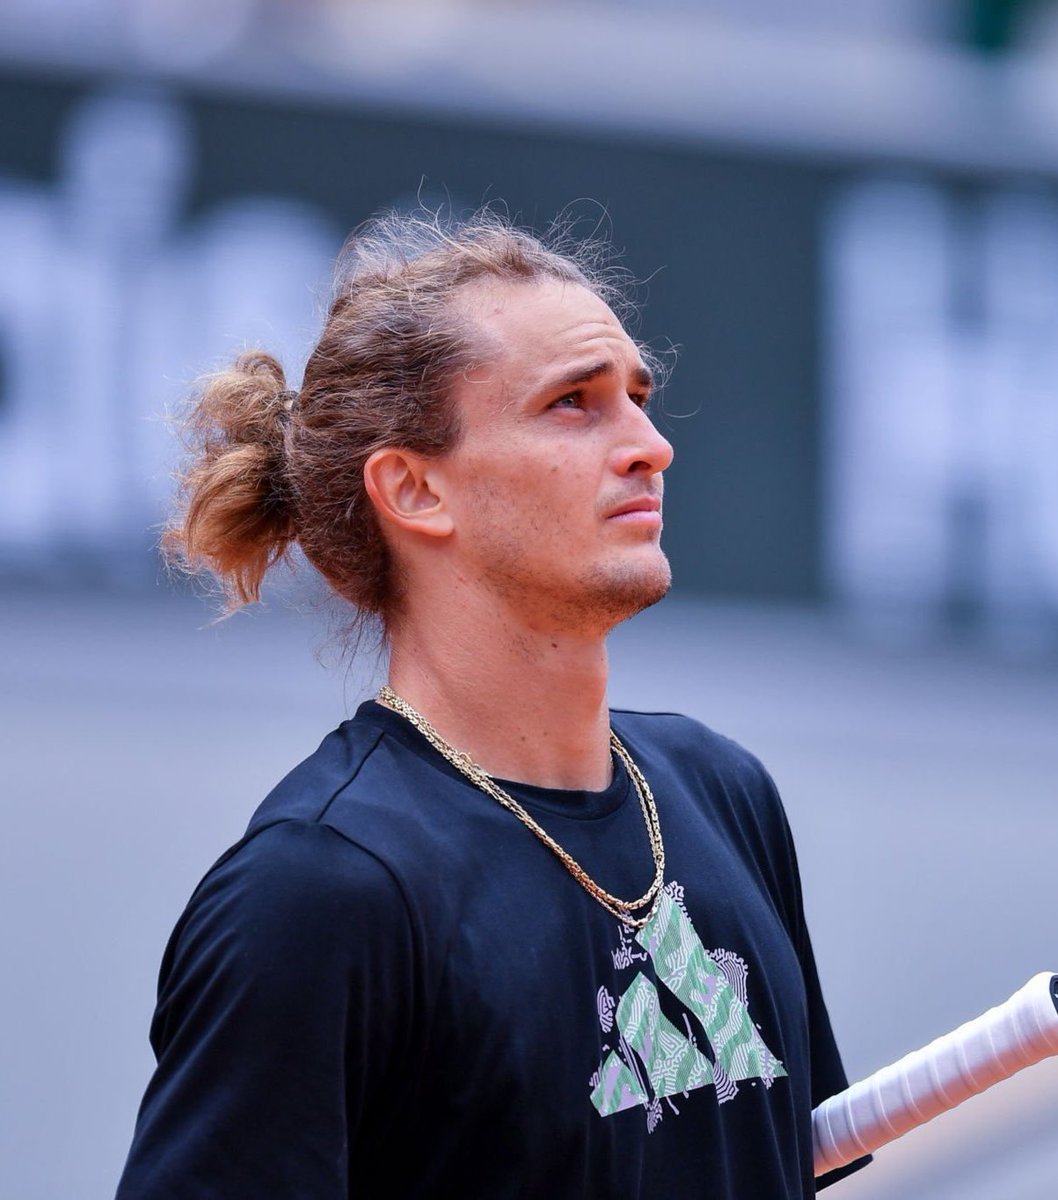 Zverev says his domestic violence case isn’t impacting his tennis & there’s no chance he’ll lose in his trial: “Not at all. At the end of the day, I do believe in the German system. I do believe in the truth. I have to be certain that, you know, I know what I did, I know what I